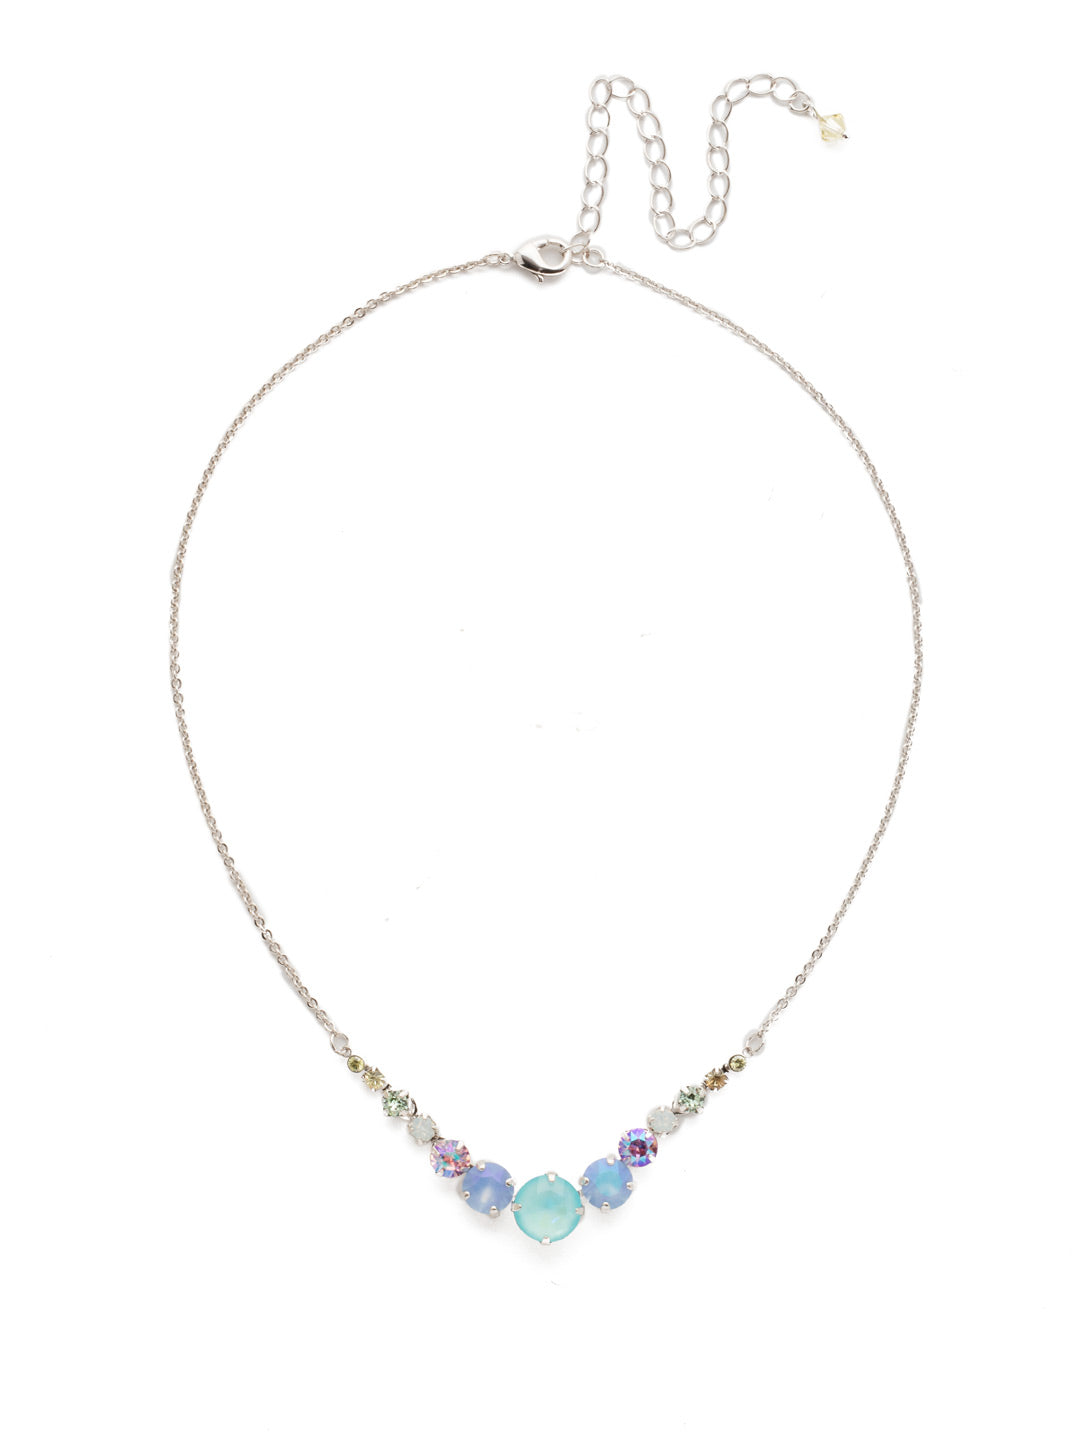 London Tennis Necklace - NCQ14RHSSU - <p>A long, simple chain paired with gorgeous round stones is exactly what every girl needs to dress things up. This round stone necklace is perfect for layering, or to just wear alone. Let the simple sparkle take over. From Sorrelli's Seersucker collection in our Palladium Silver-tone finish.</p>